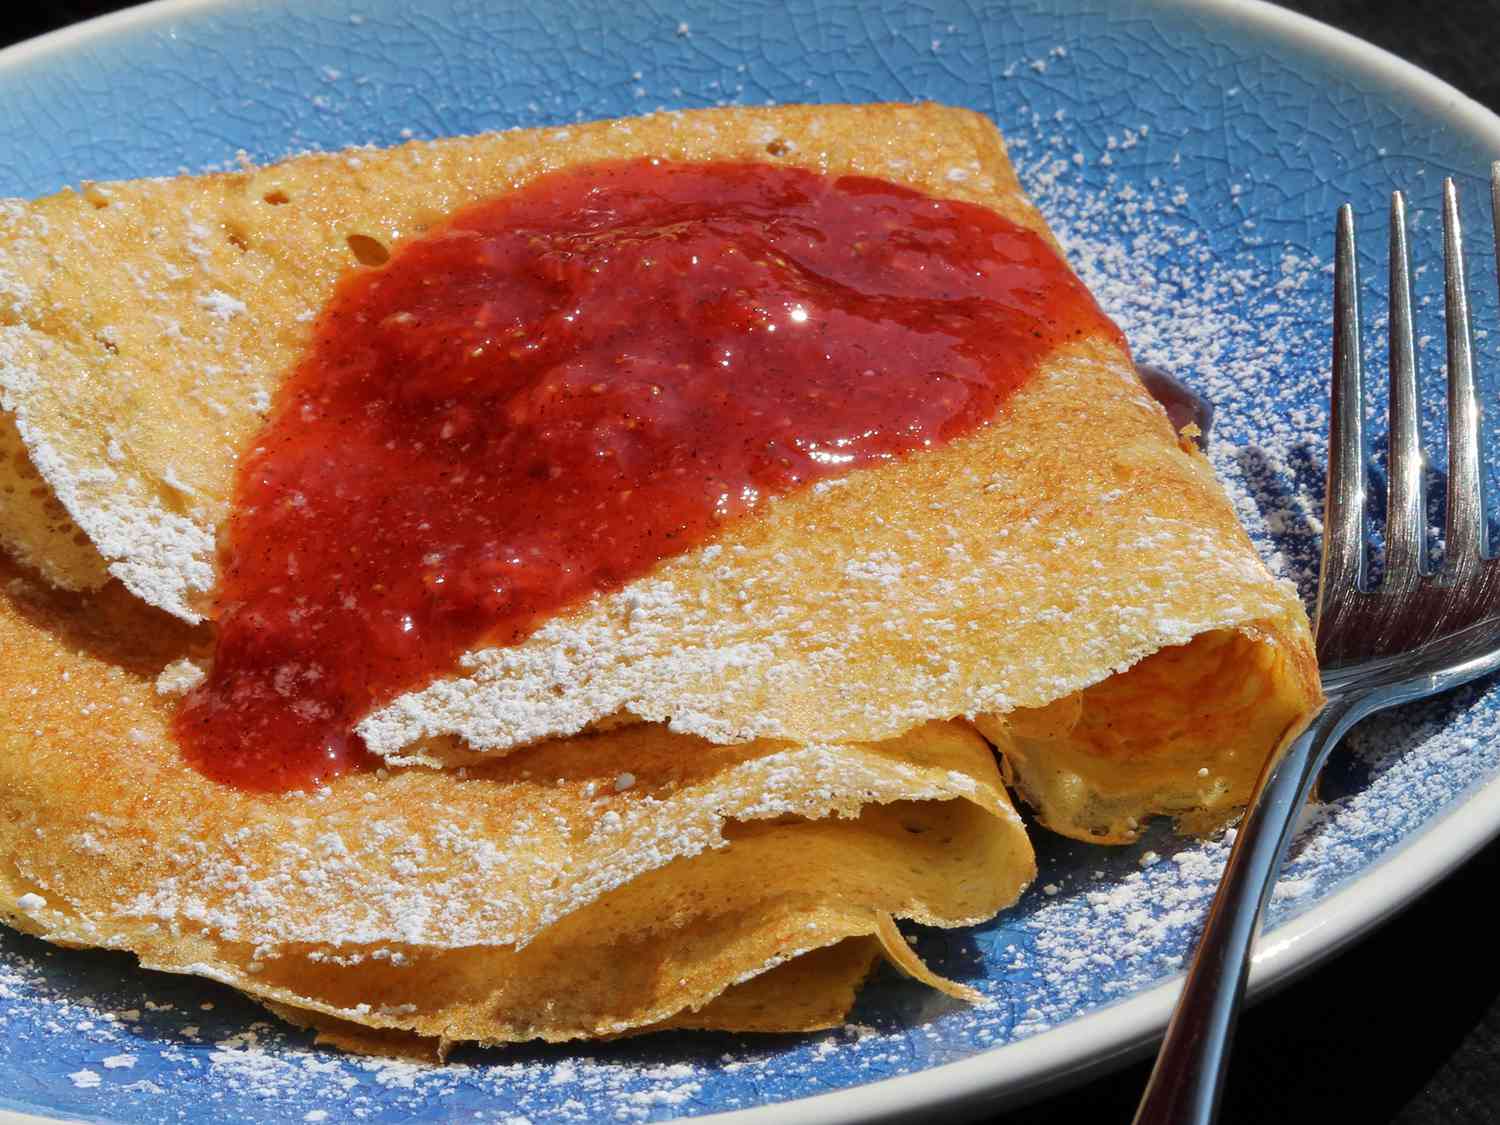 close up view of Finnish Pancakes garnished with jam and powdered sugar on a blue plate with a fork